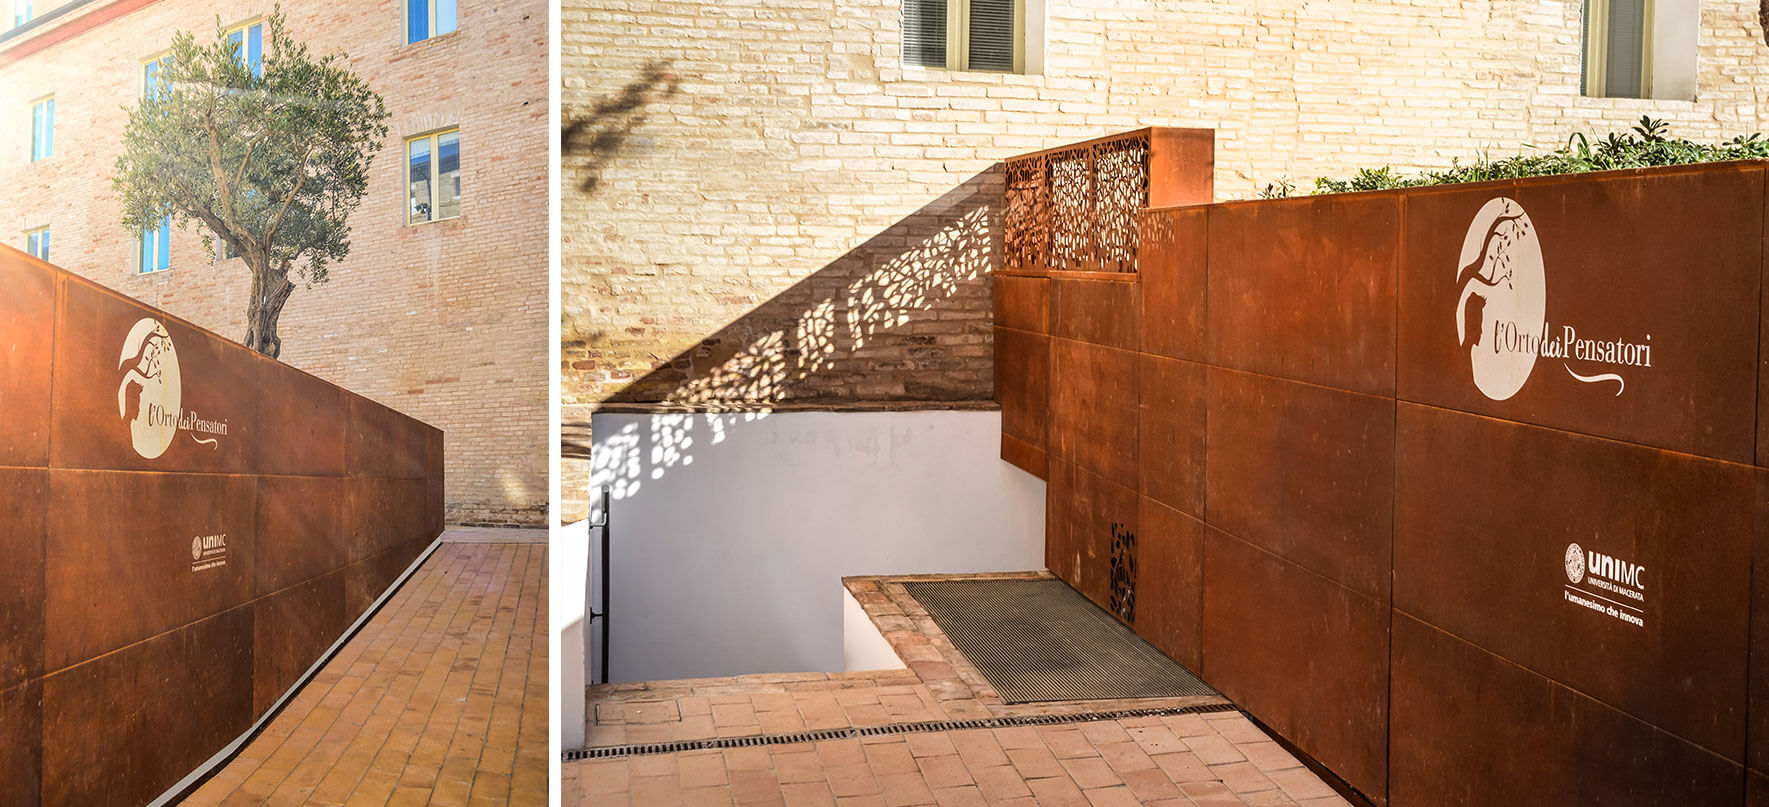 public entrance with wall cladded with corten steel sheets and corten borders